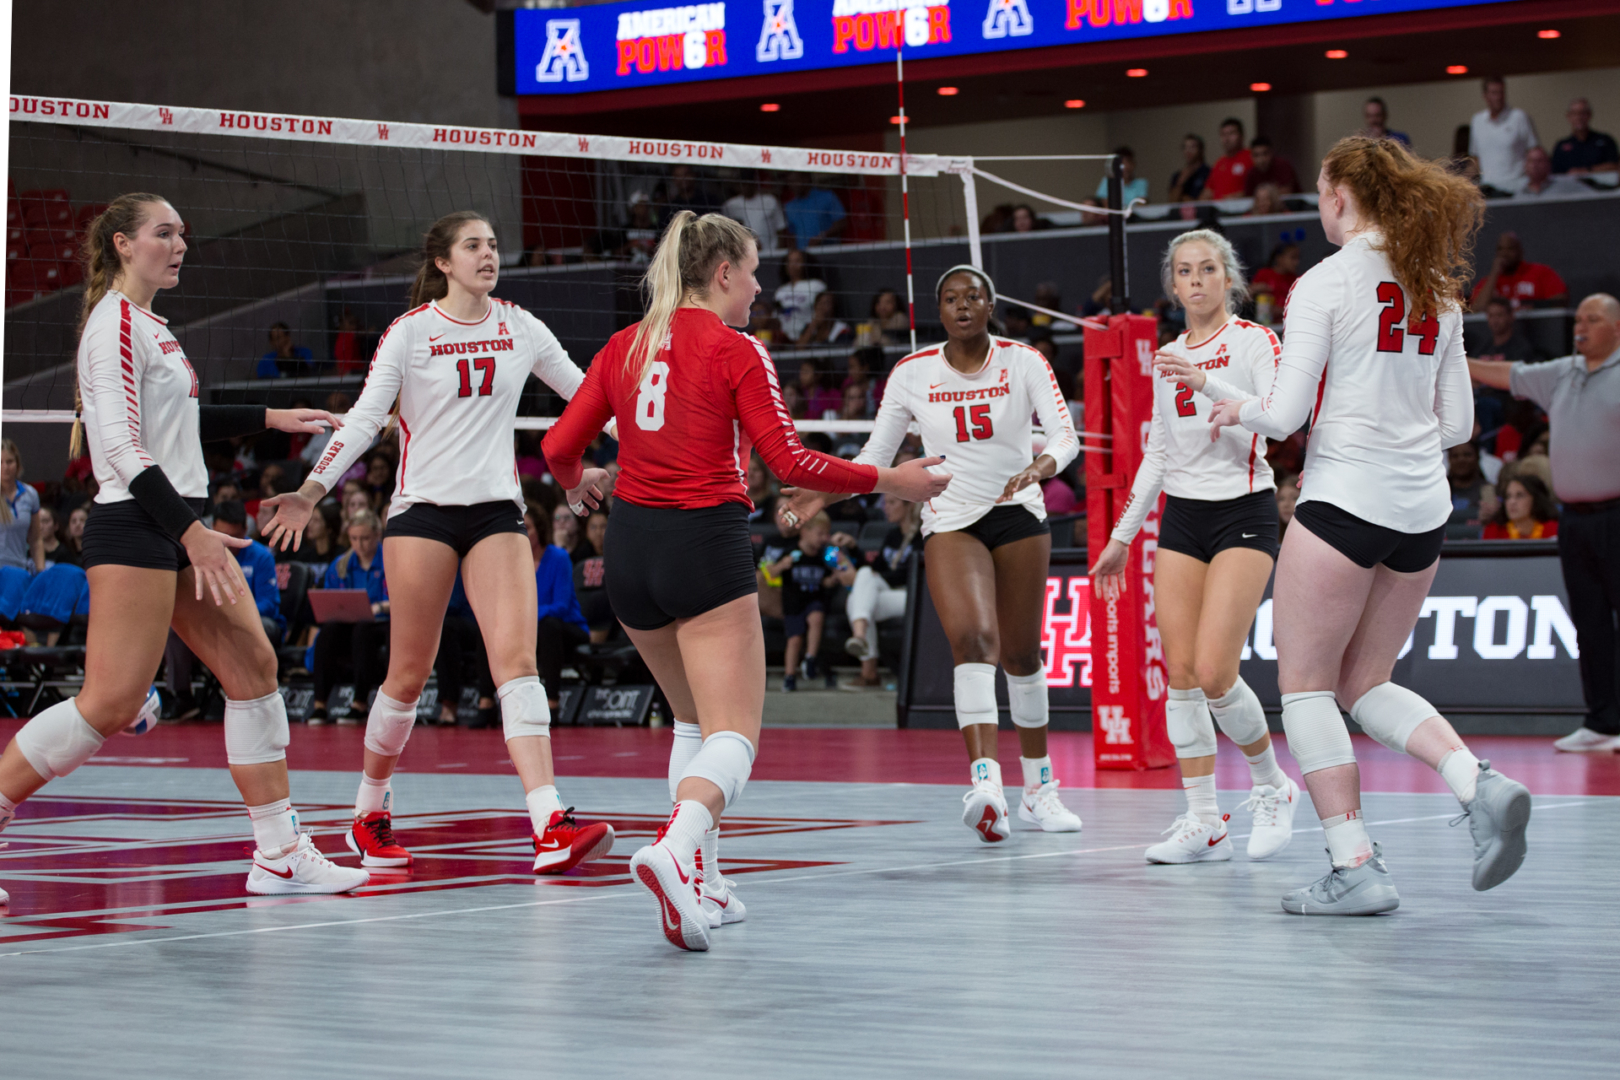 Houston completed its fourth comeback in as many games after taking down Tulane 3-2 Friday night. | Trevor Nolley/The Cougar